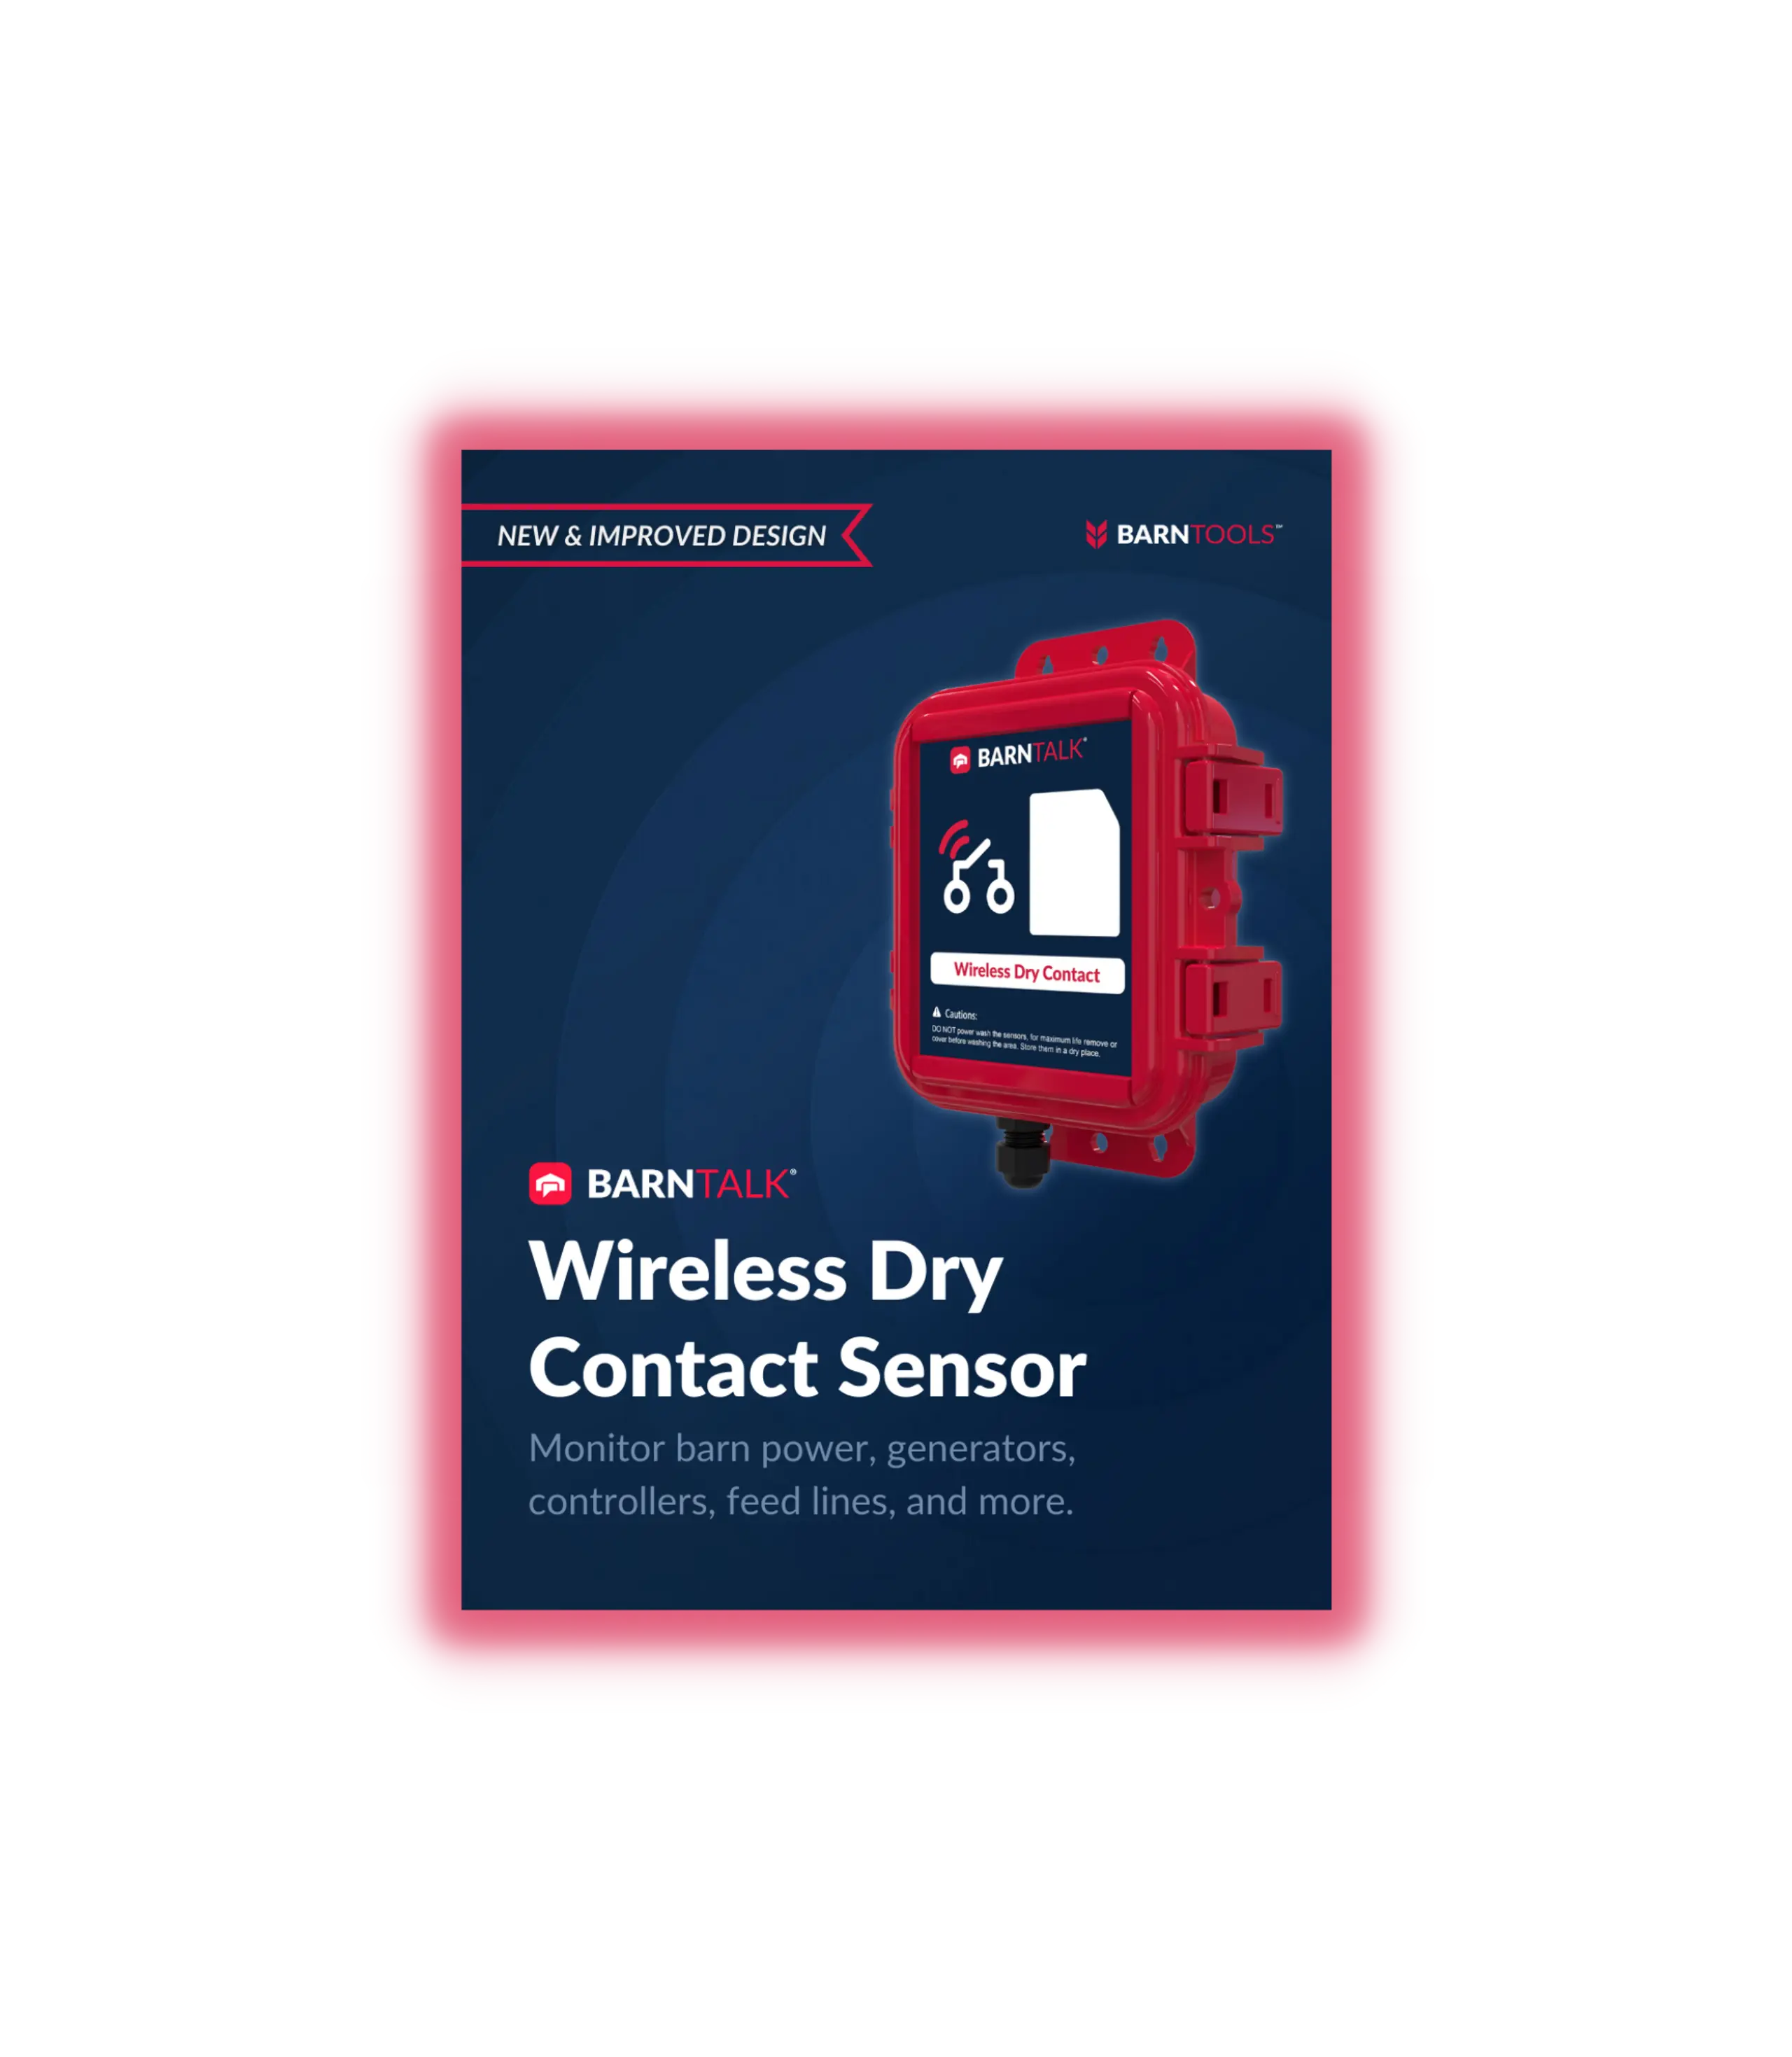 Wireless Dry Contact Sensor Product Guide Thumbnail